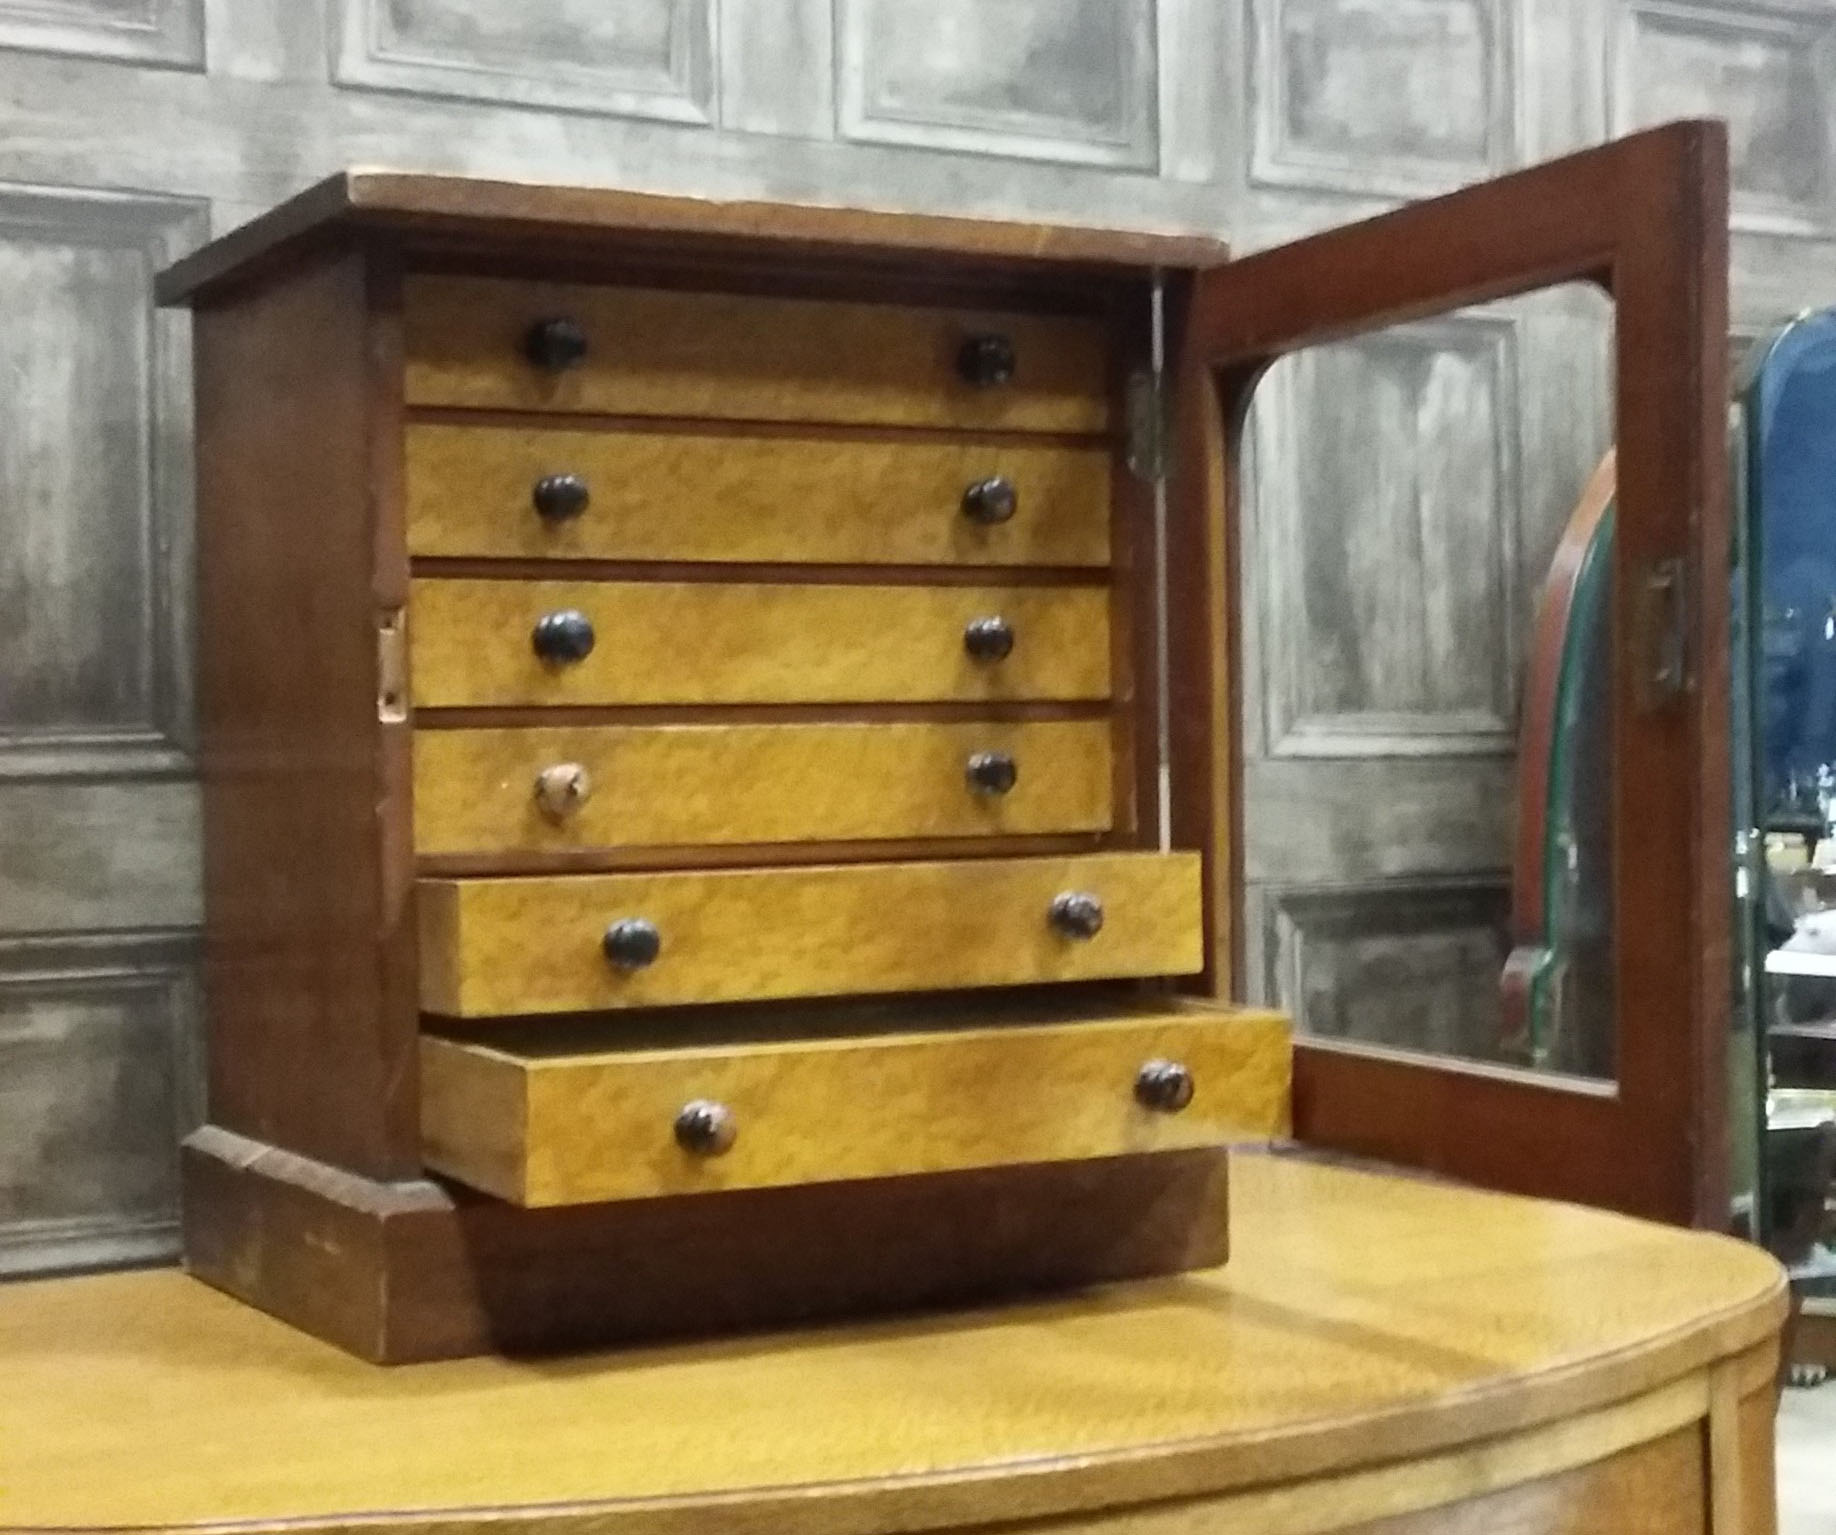 VICTORIAN SIX DRAWER SPECIMEN CABINET each drawer with collection of pinned butterfly specimens, - Image 4 of 8